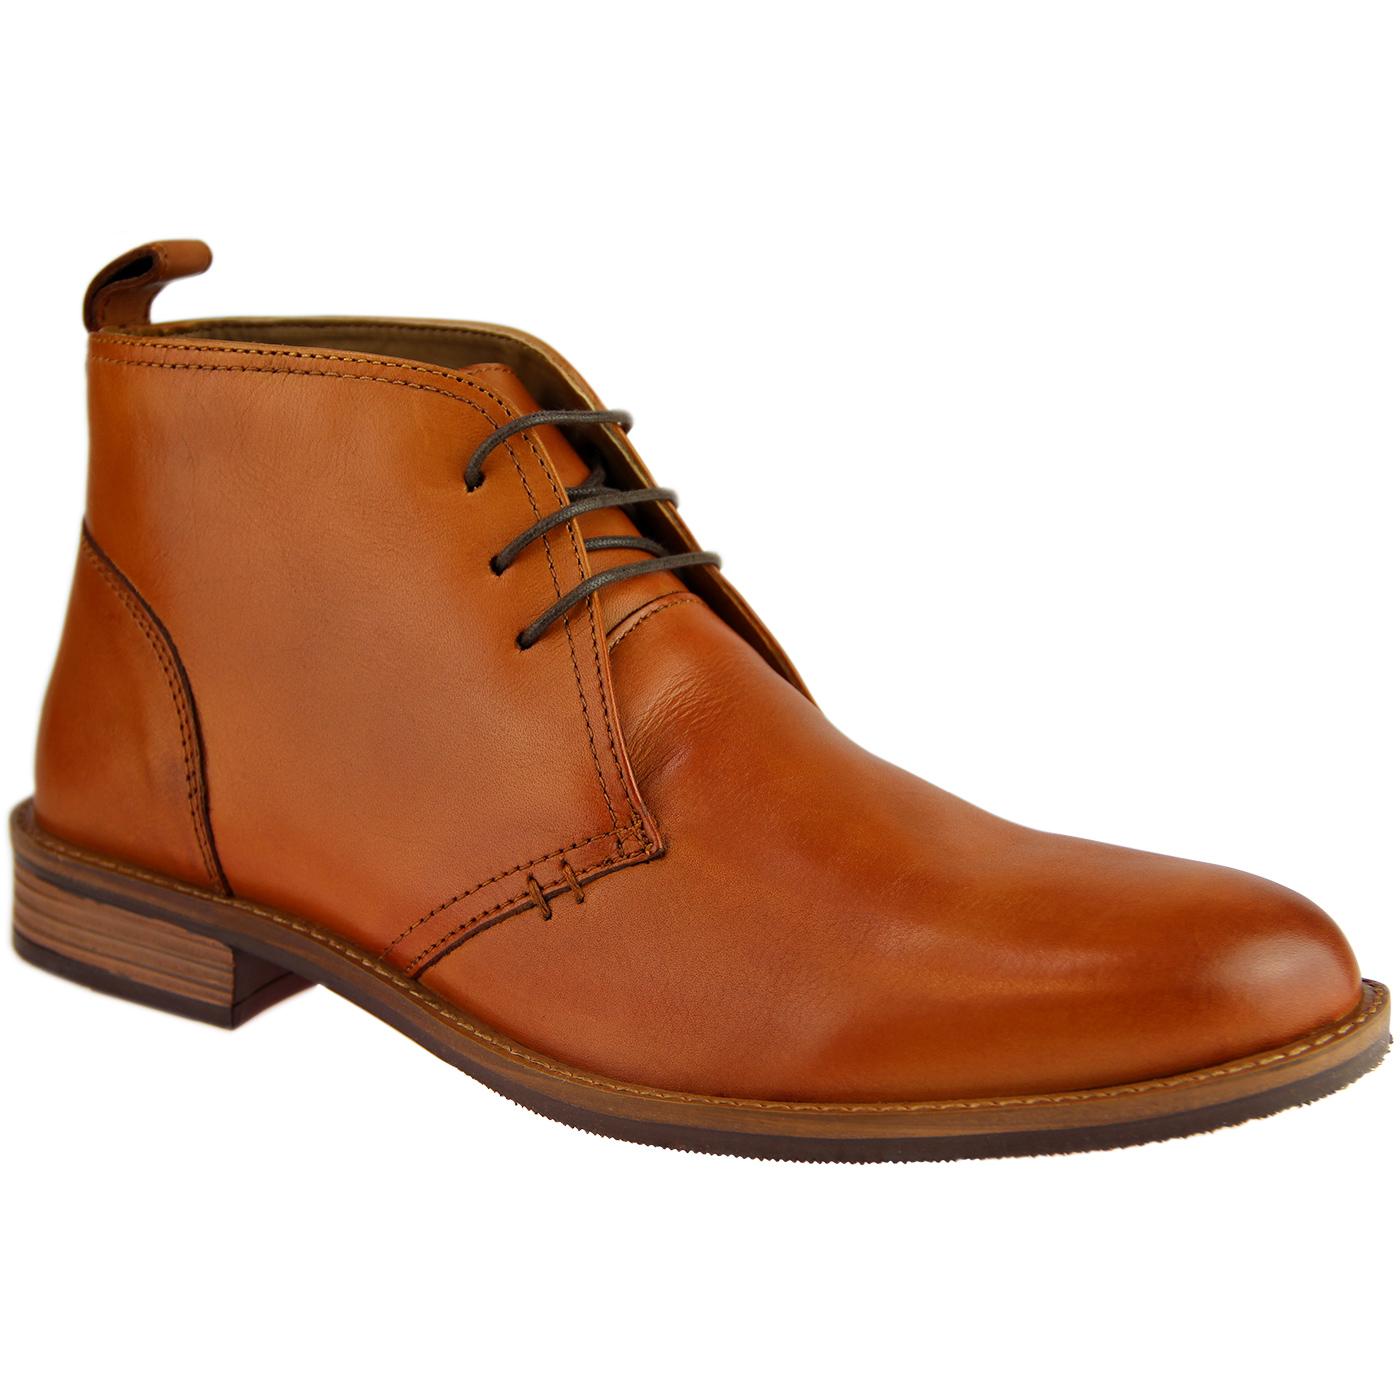 Men's Retro Indie Mod Burnished Leather Desert Boots in Tan